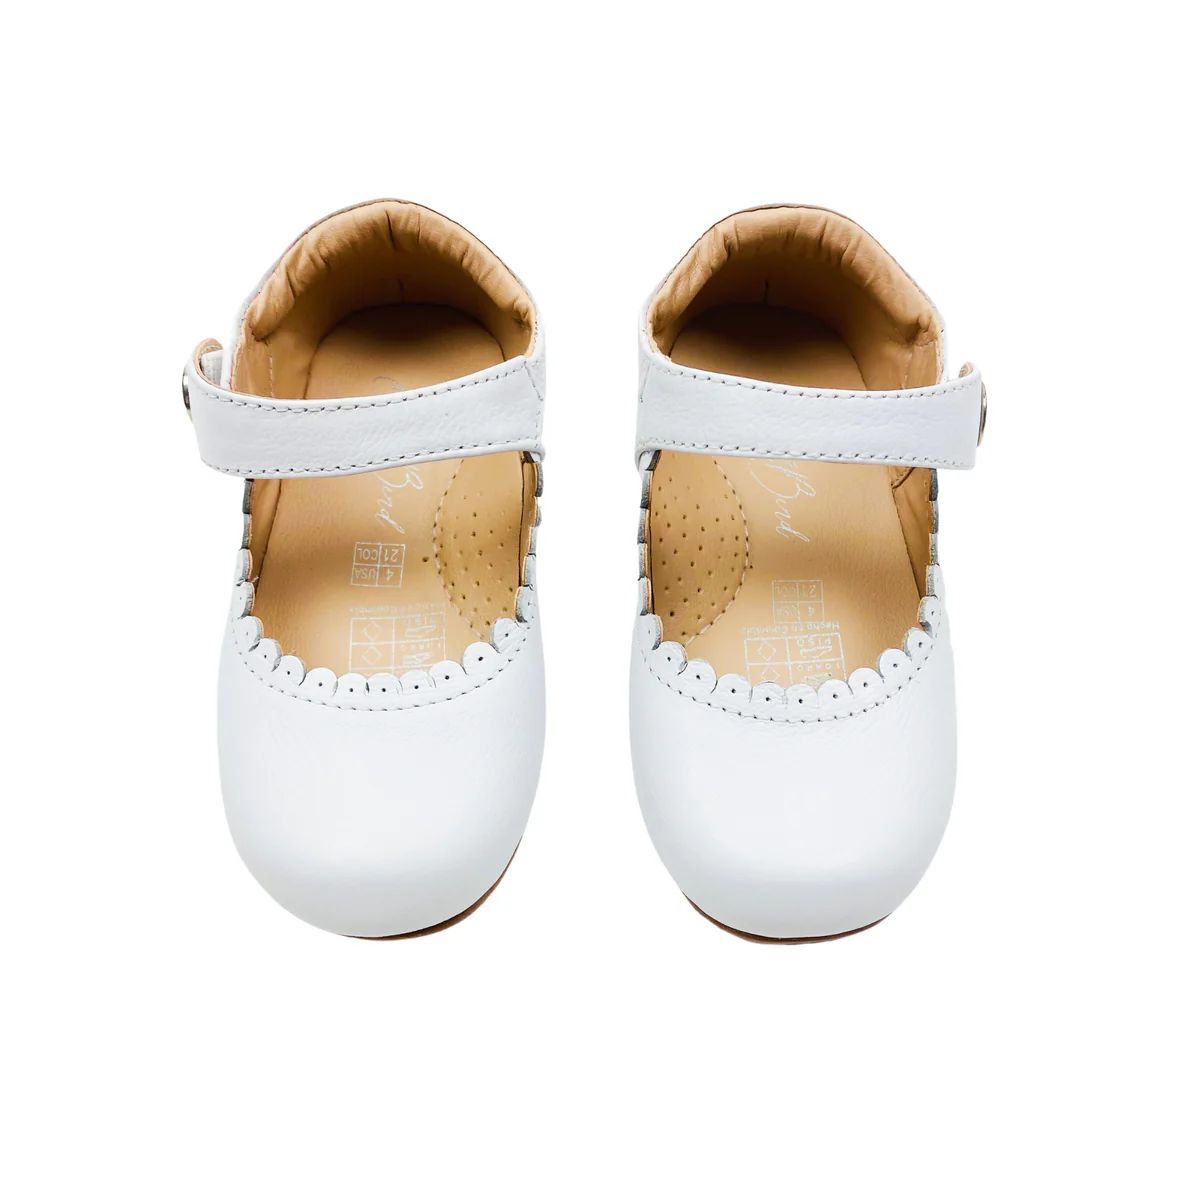 Mary Jane Toddler Shoes ♡More Colors♡ | BellBird